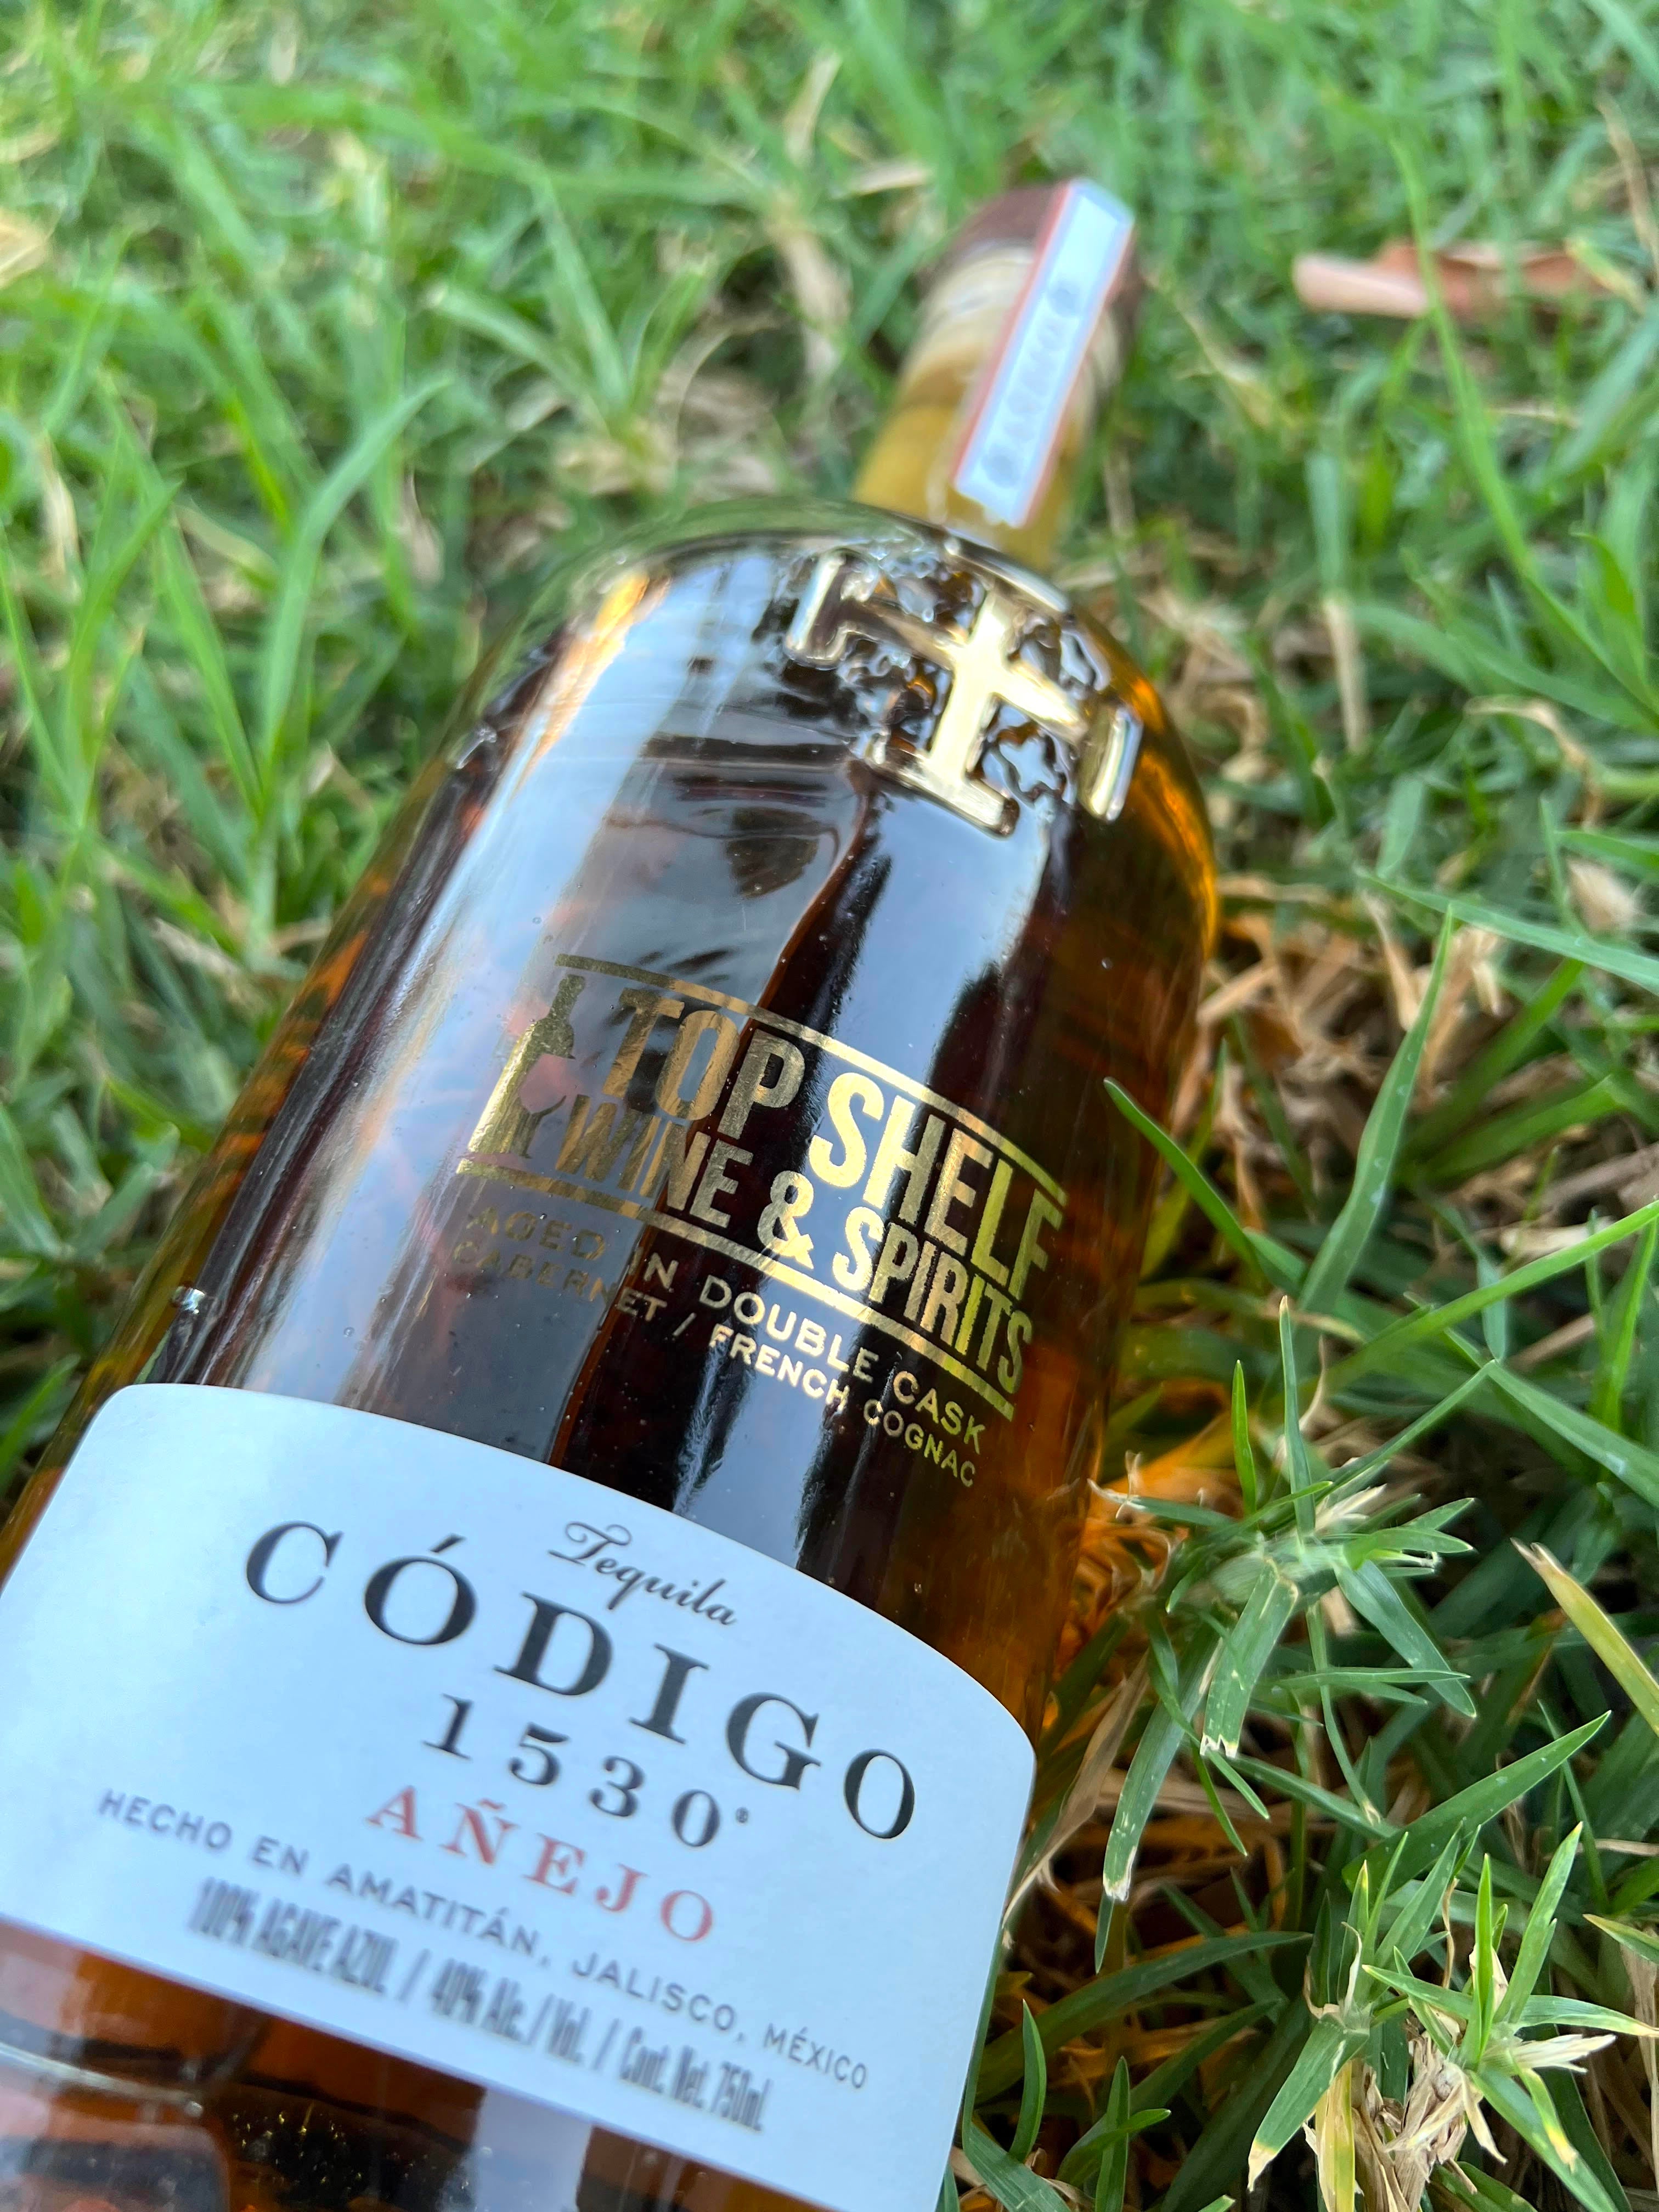 Codigo 1530 Tequila branches out in Americas, Travel Retail through Monarq  Group deal - Just Drinks